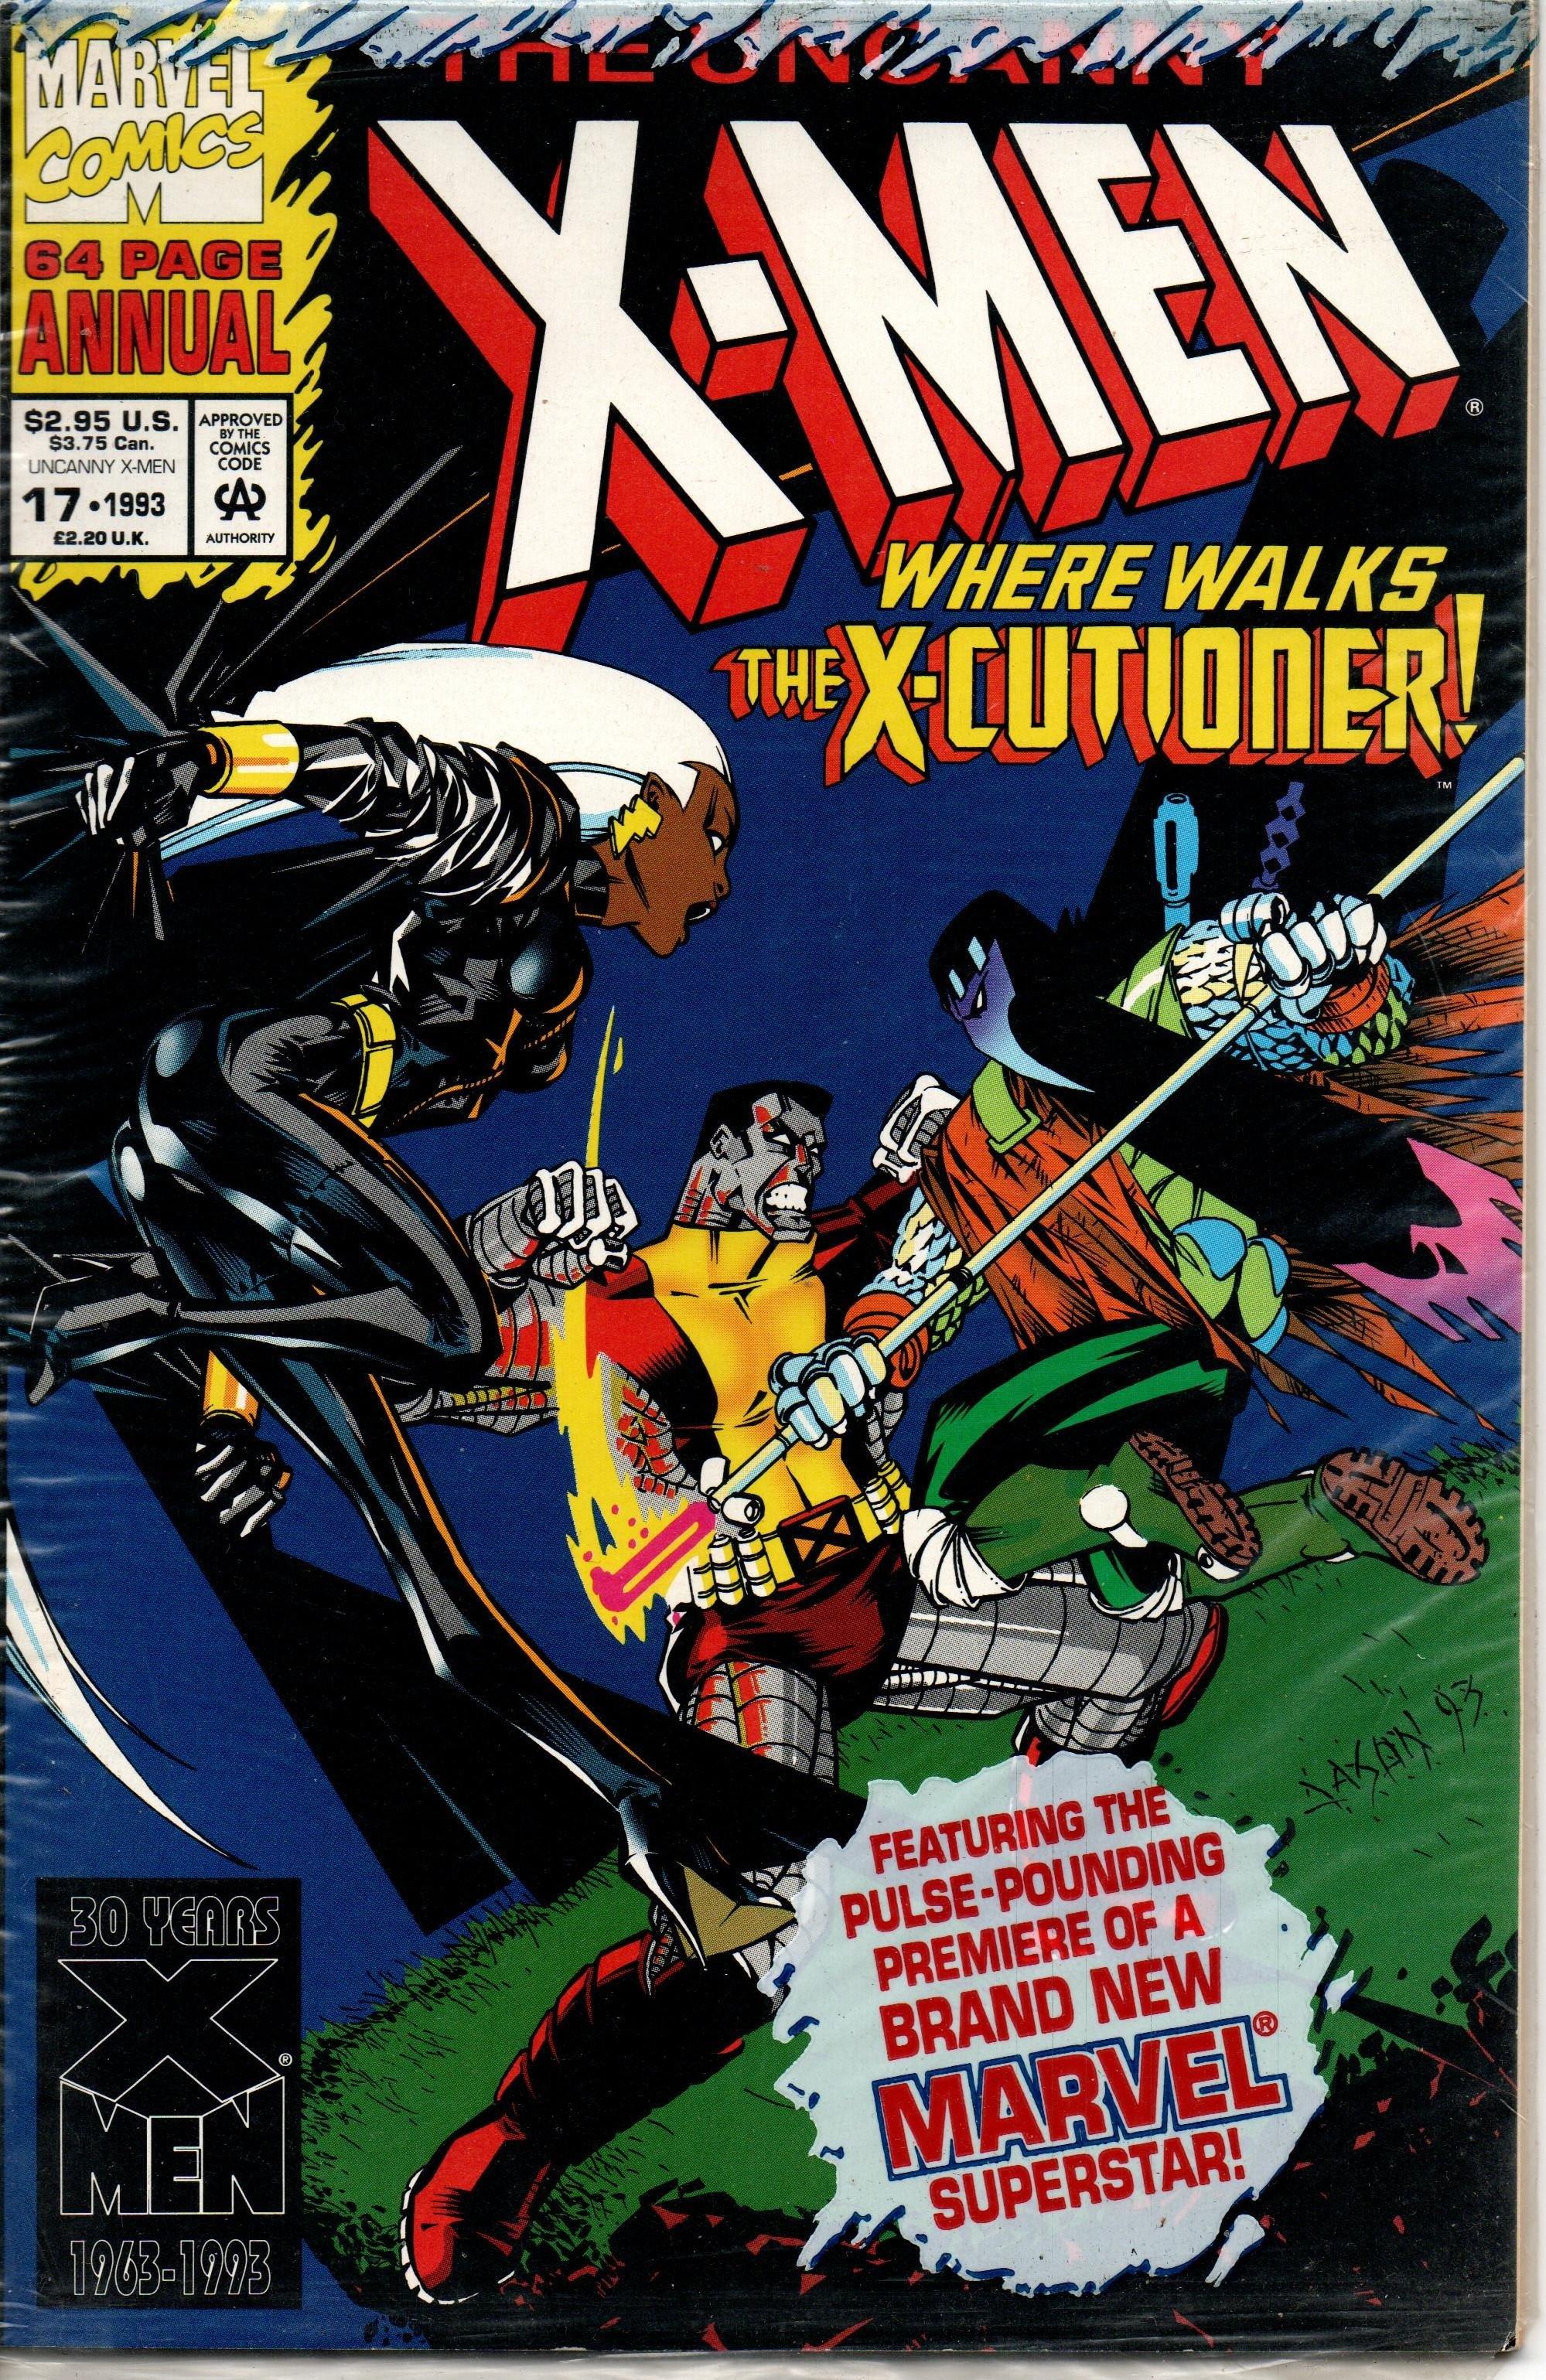 THE UNCANNY X-MEN #17 (1ST SERIES 1963) ANNUAL 1993 [USED]